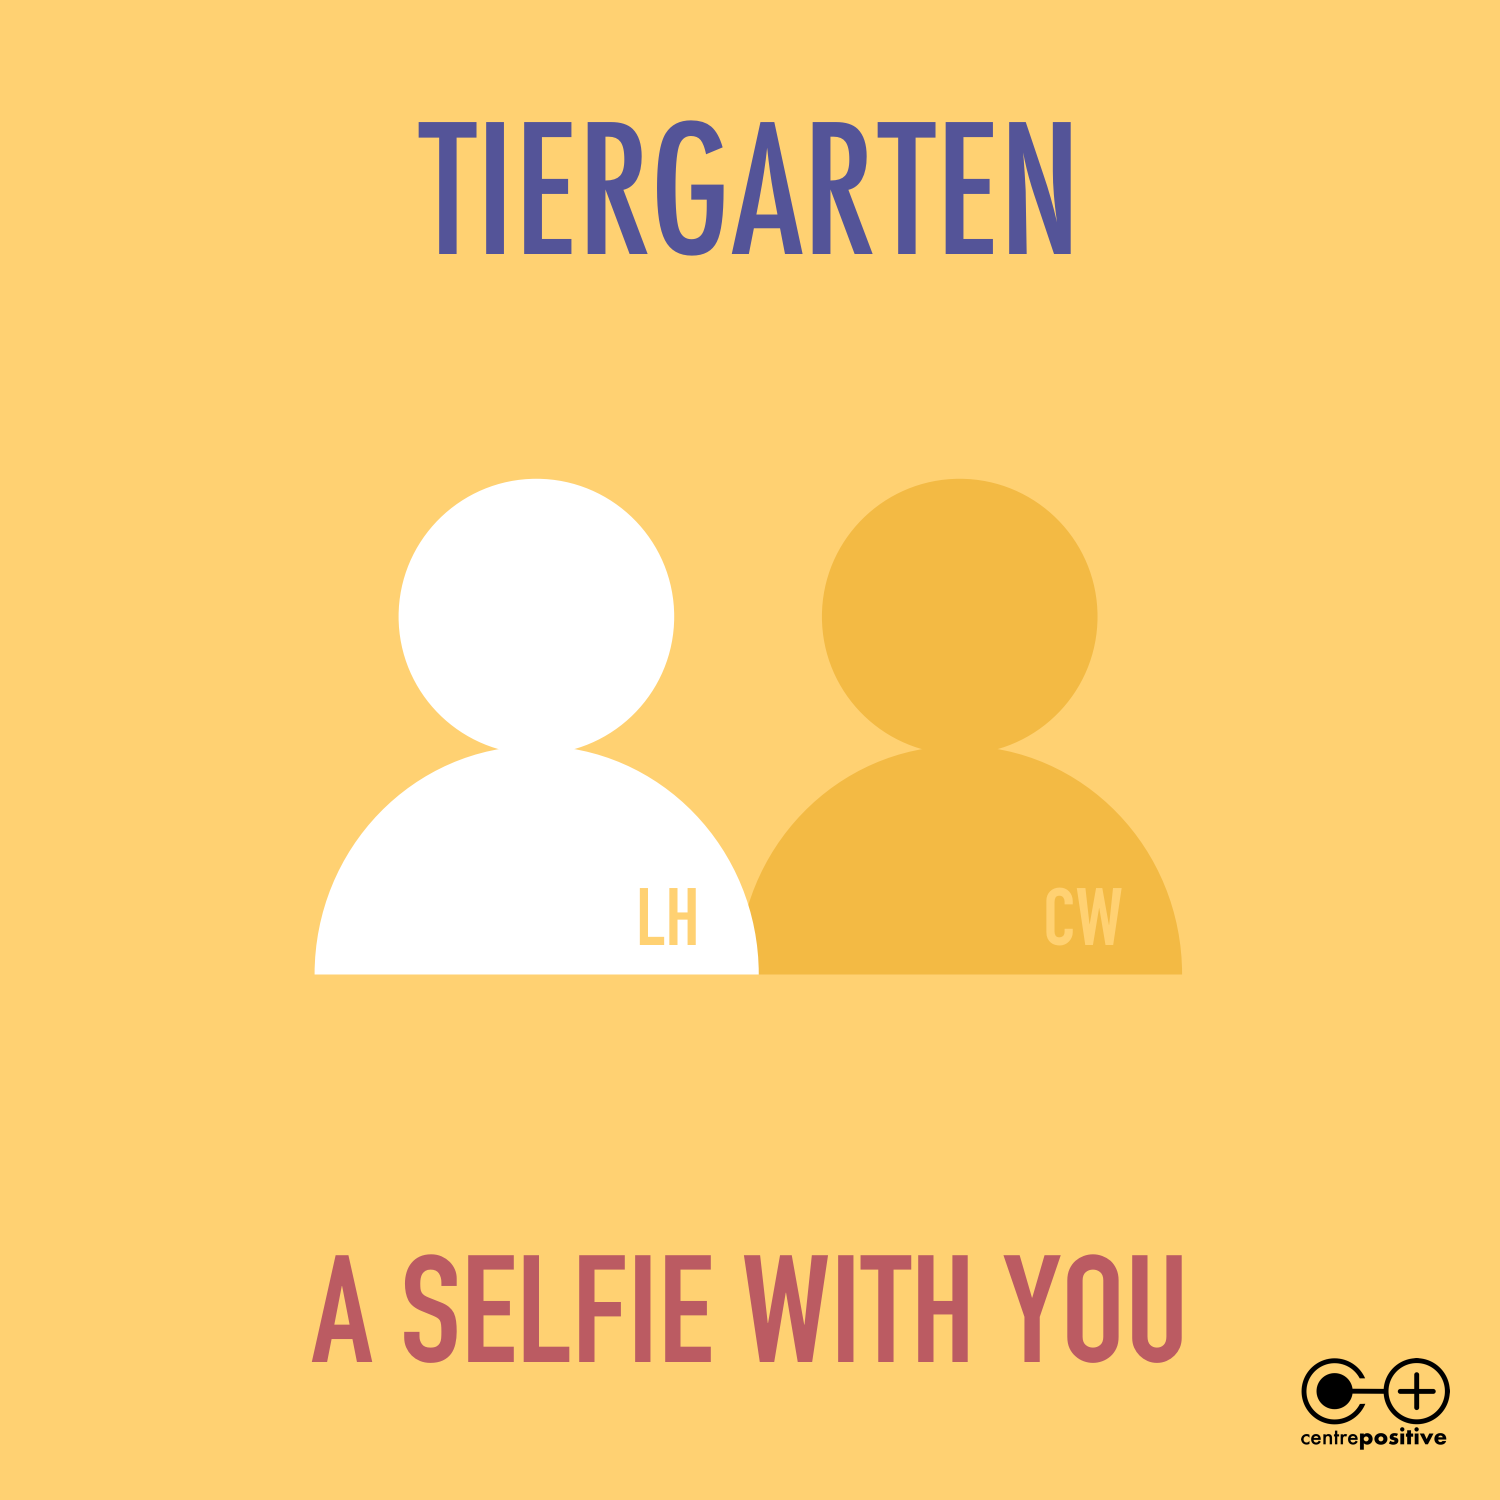 The A Selfie With You single cover